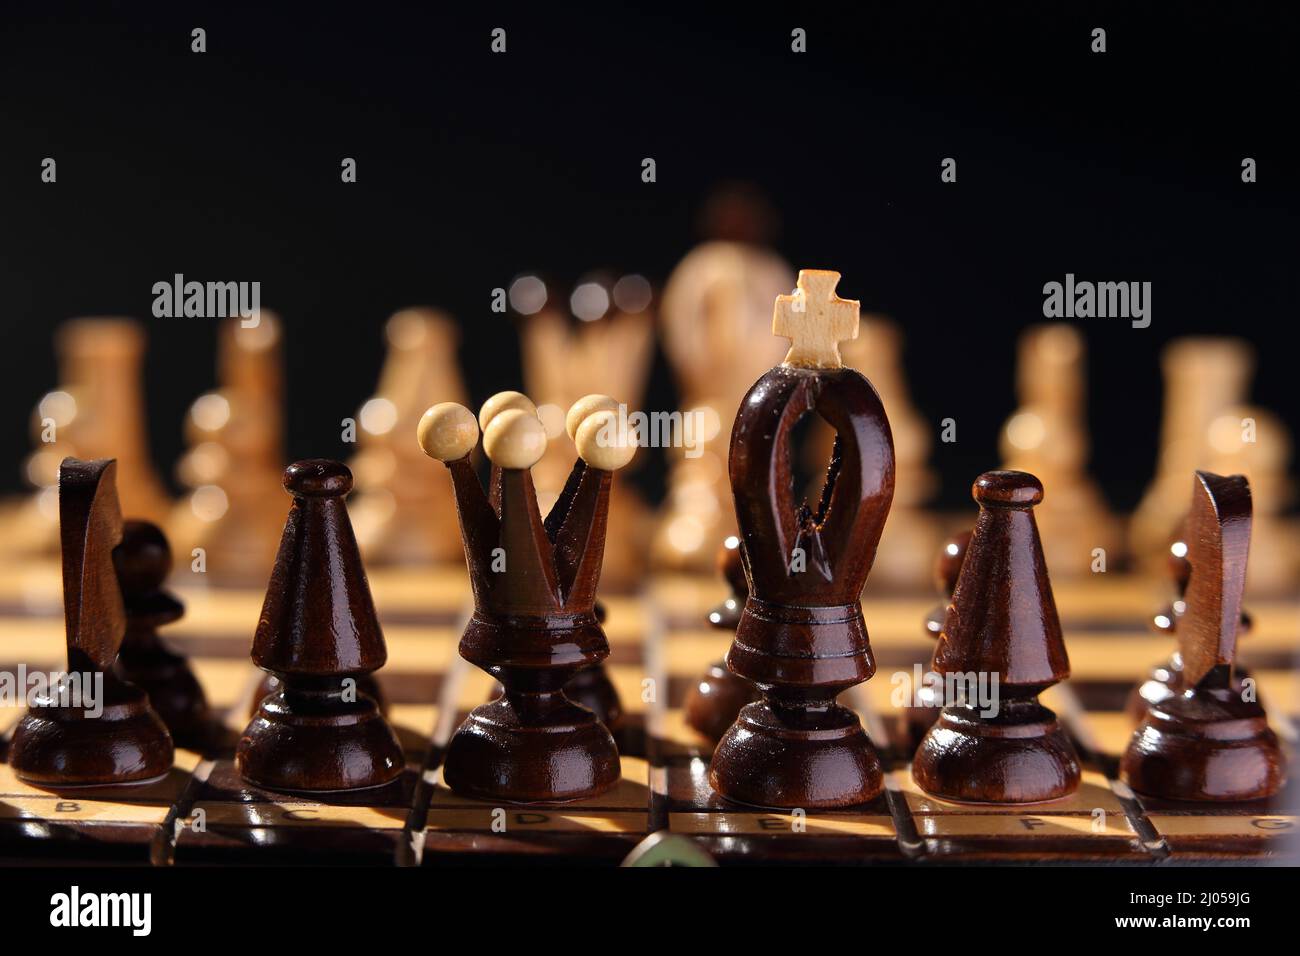 chessboard and wooden chess game Stock Photo